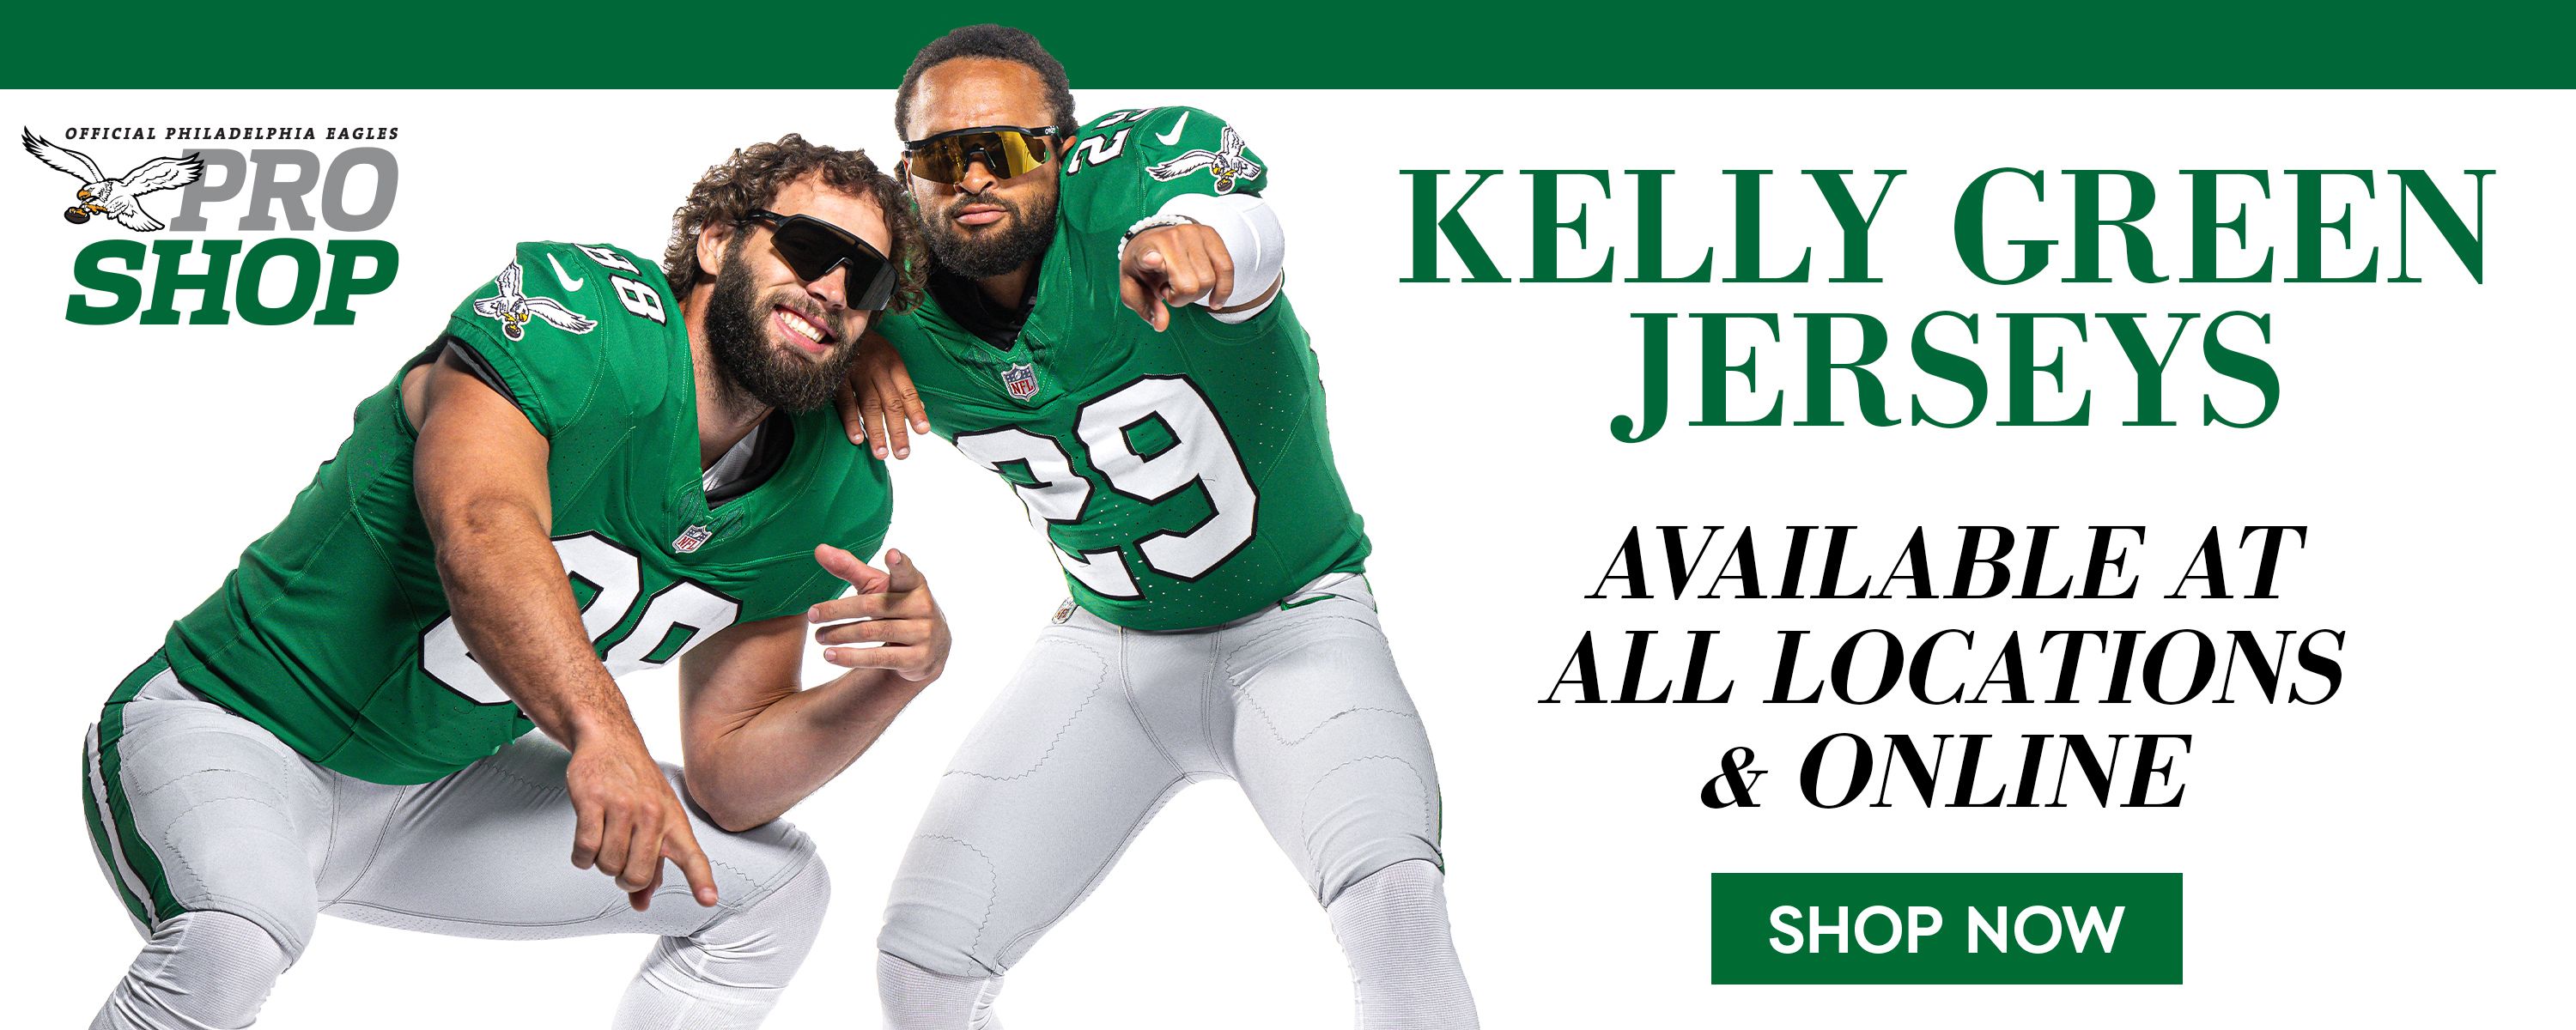 Where to buy Eagles Kelly Green throwback uniforms: purchase